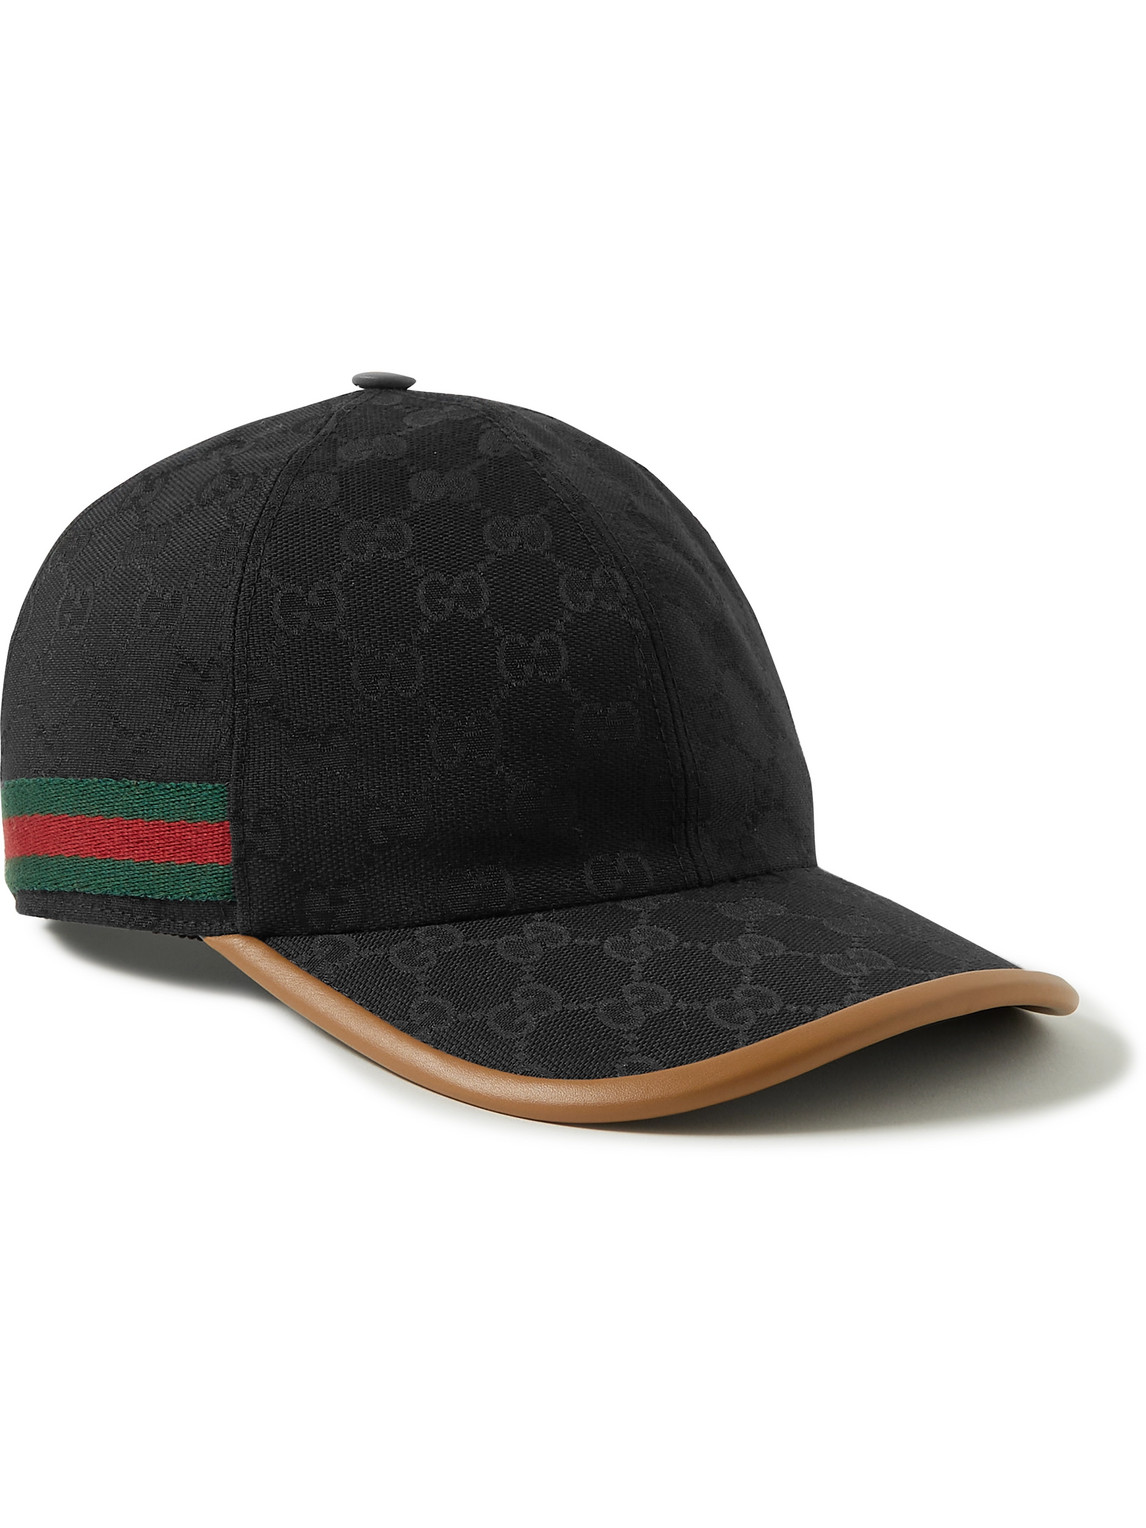 GUCCI LEATHER AND WEBBBING-TRIMMED MONOGRAMMED CANVAS BASEBALL CAP